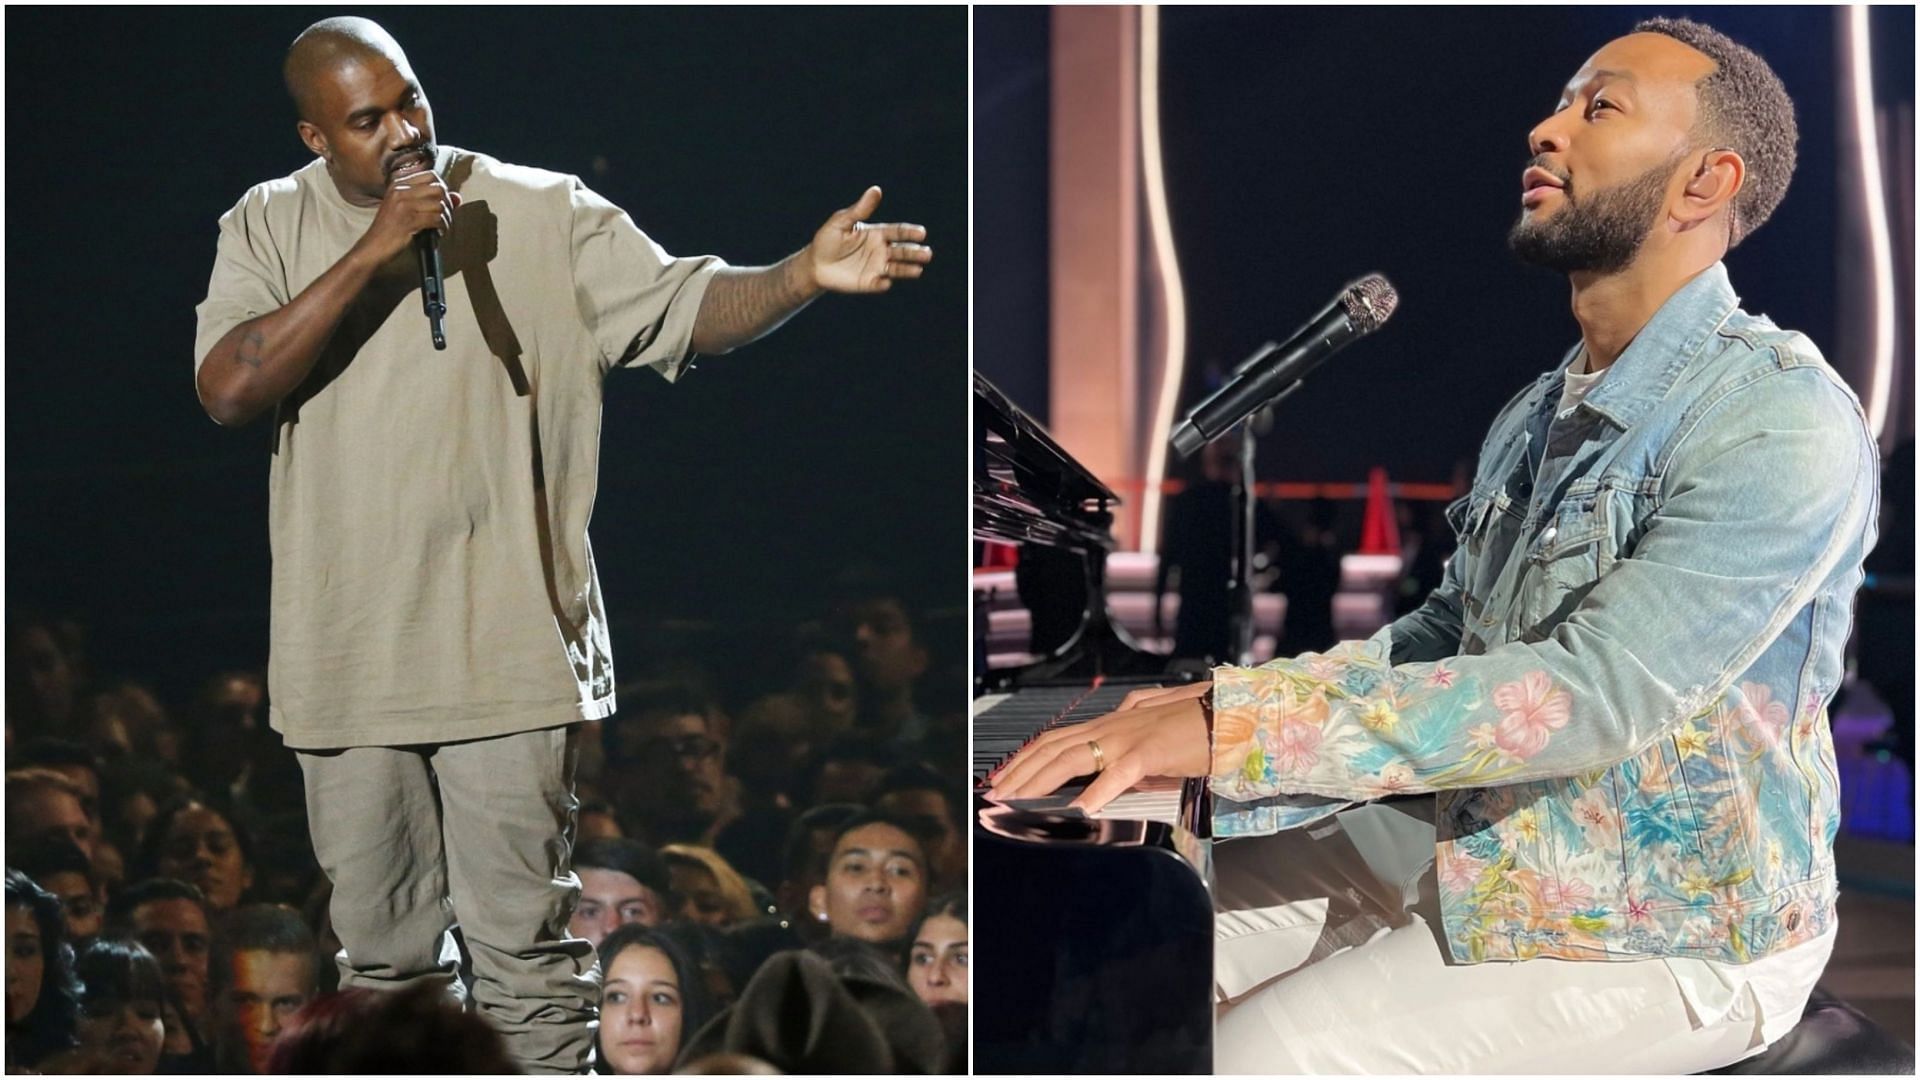 John Legend opened up about this fallout with Kanye West over politics. (Images via Getty)